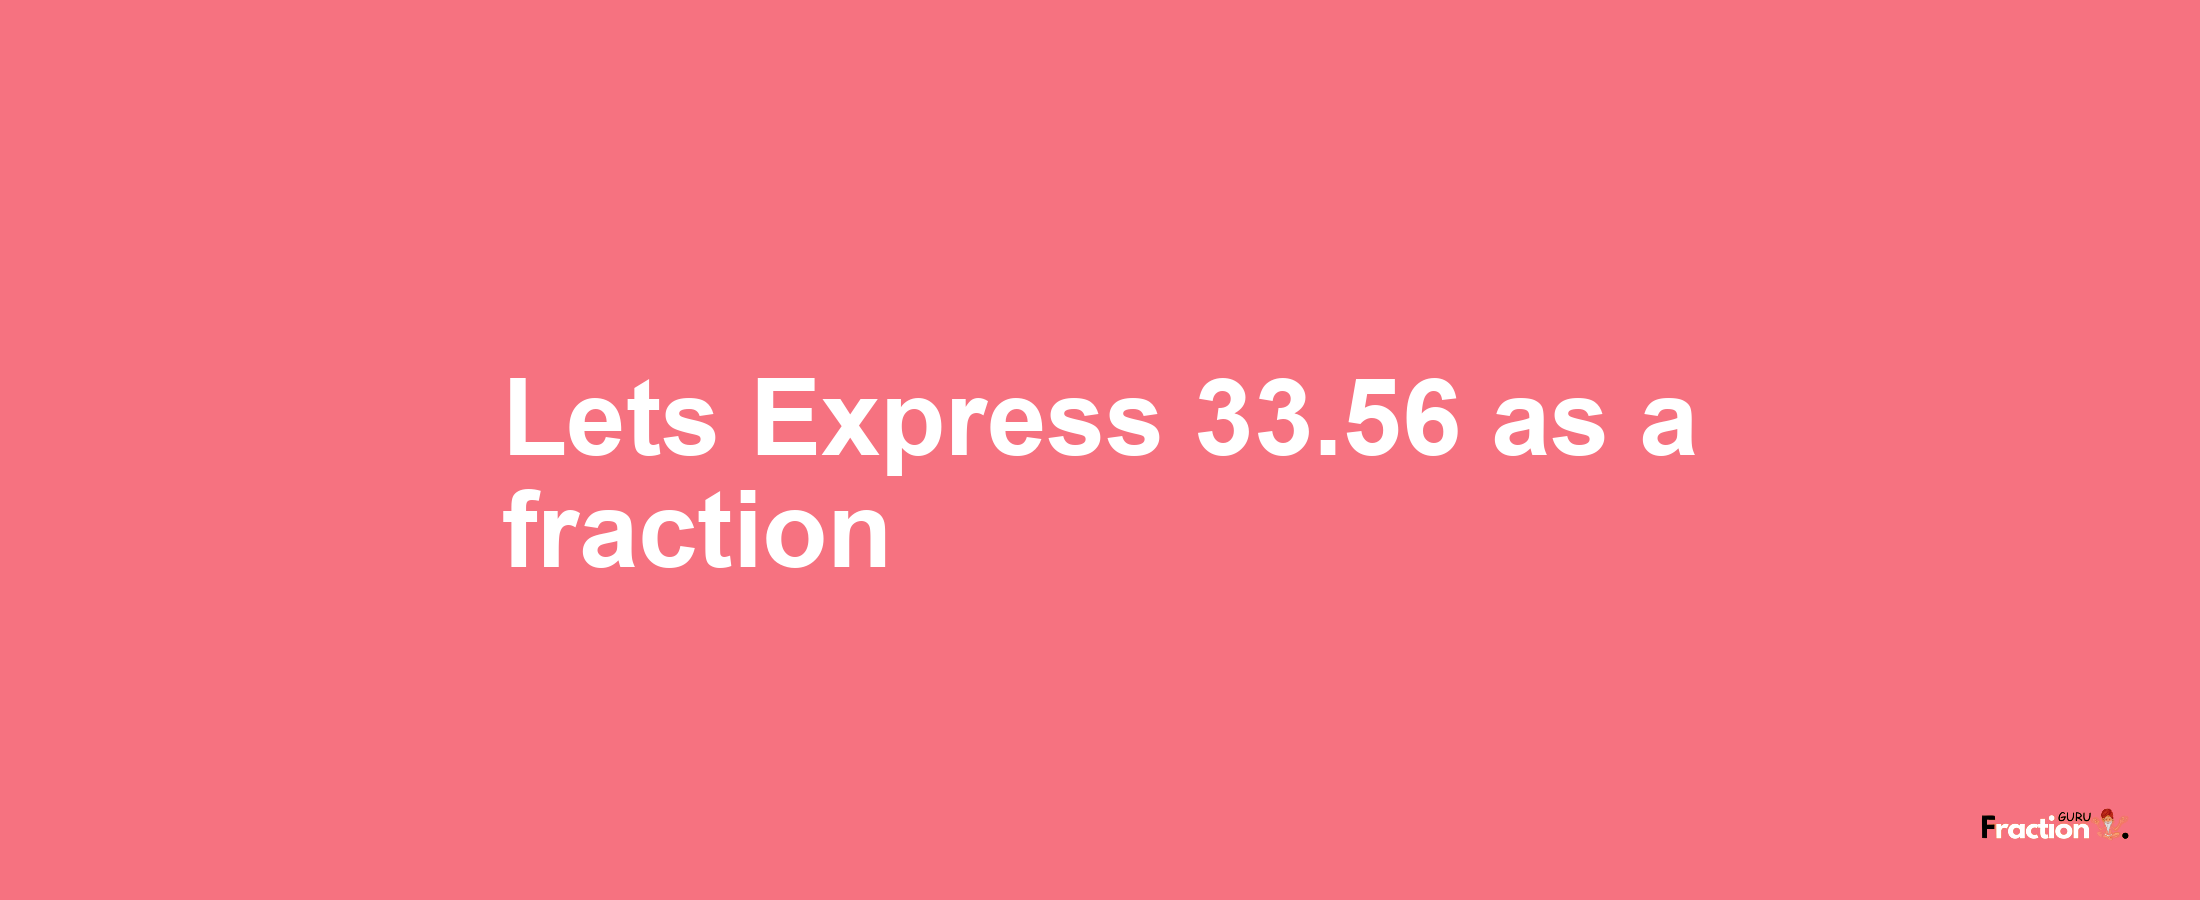 Lets Express 33.56 as afraction